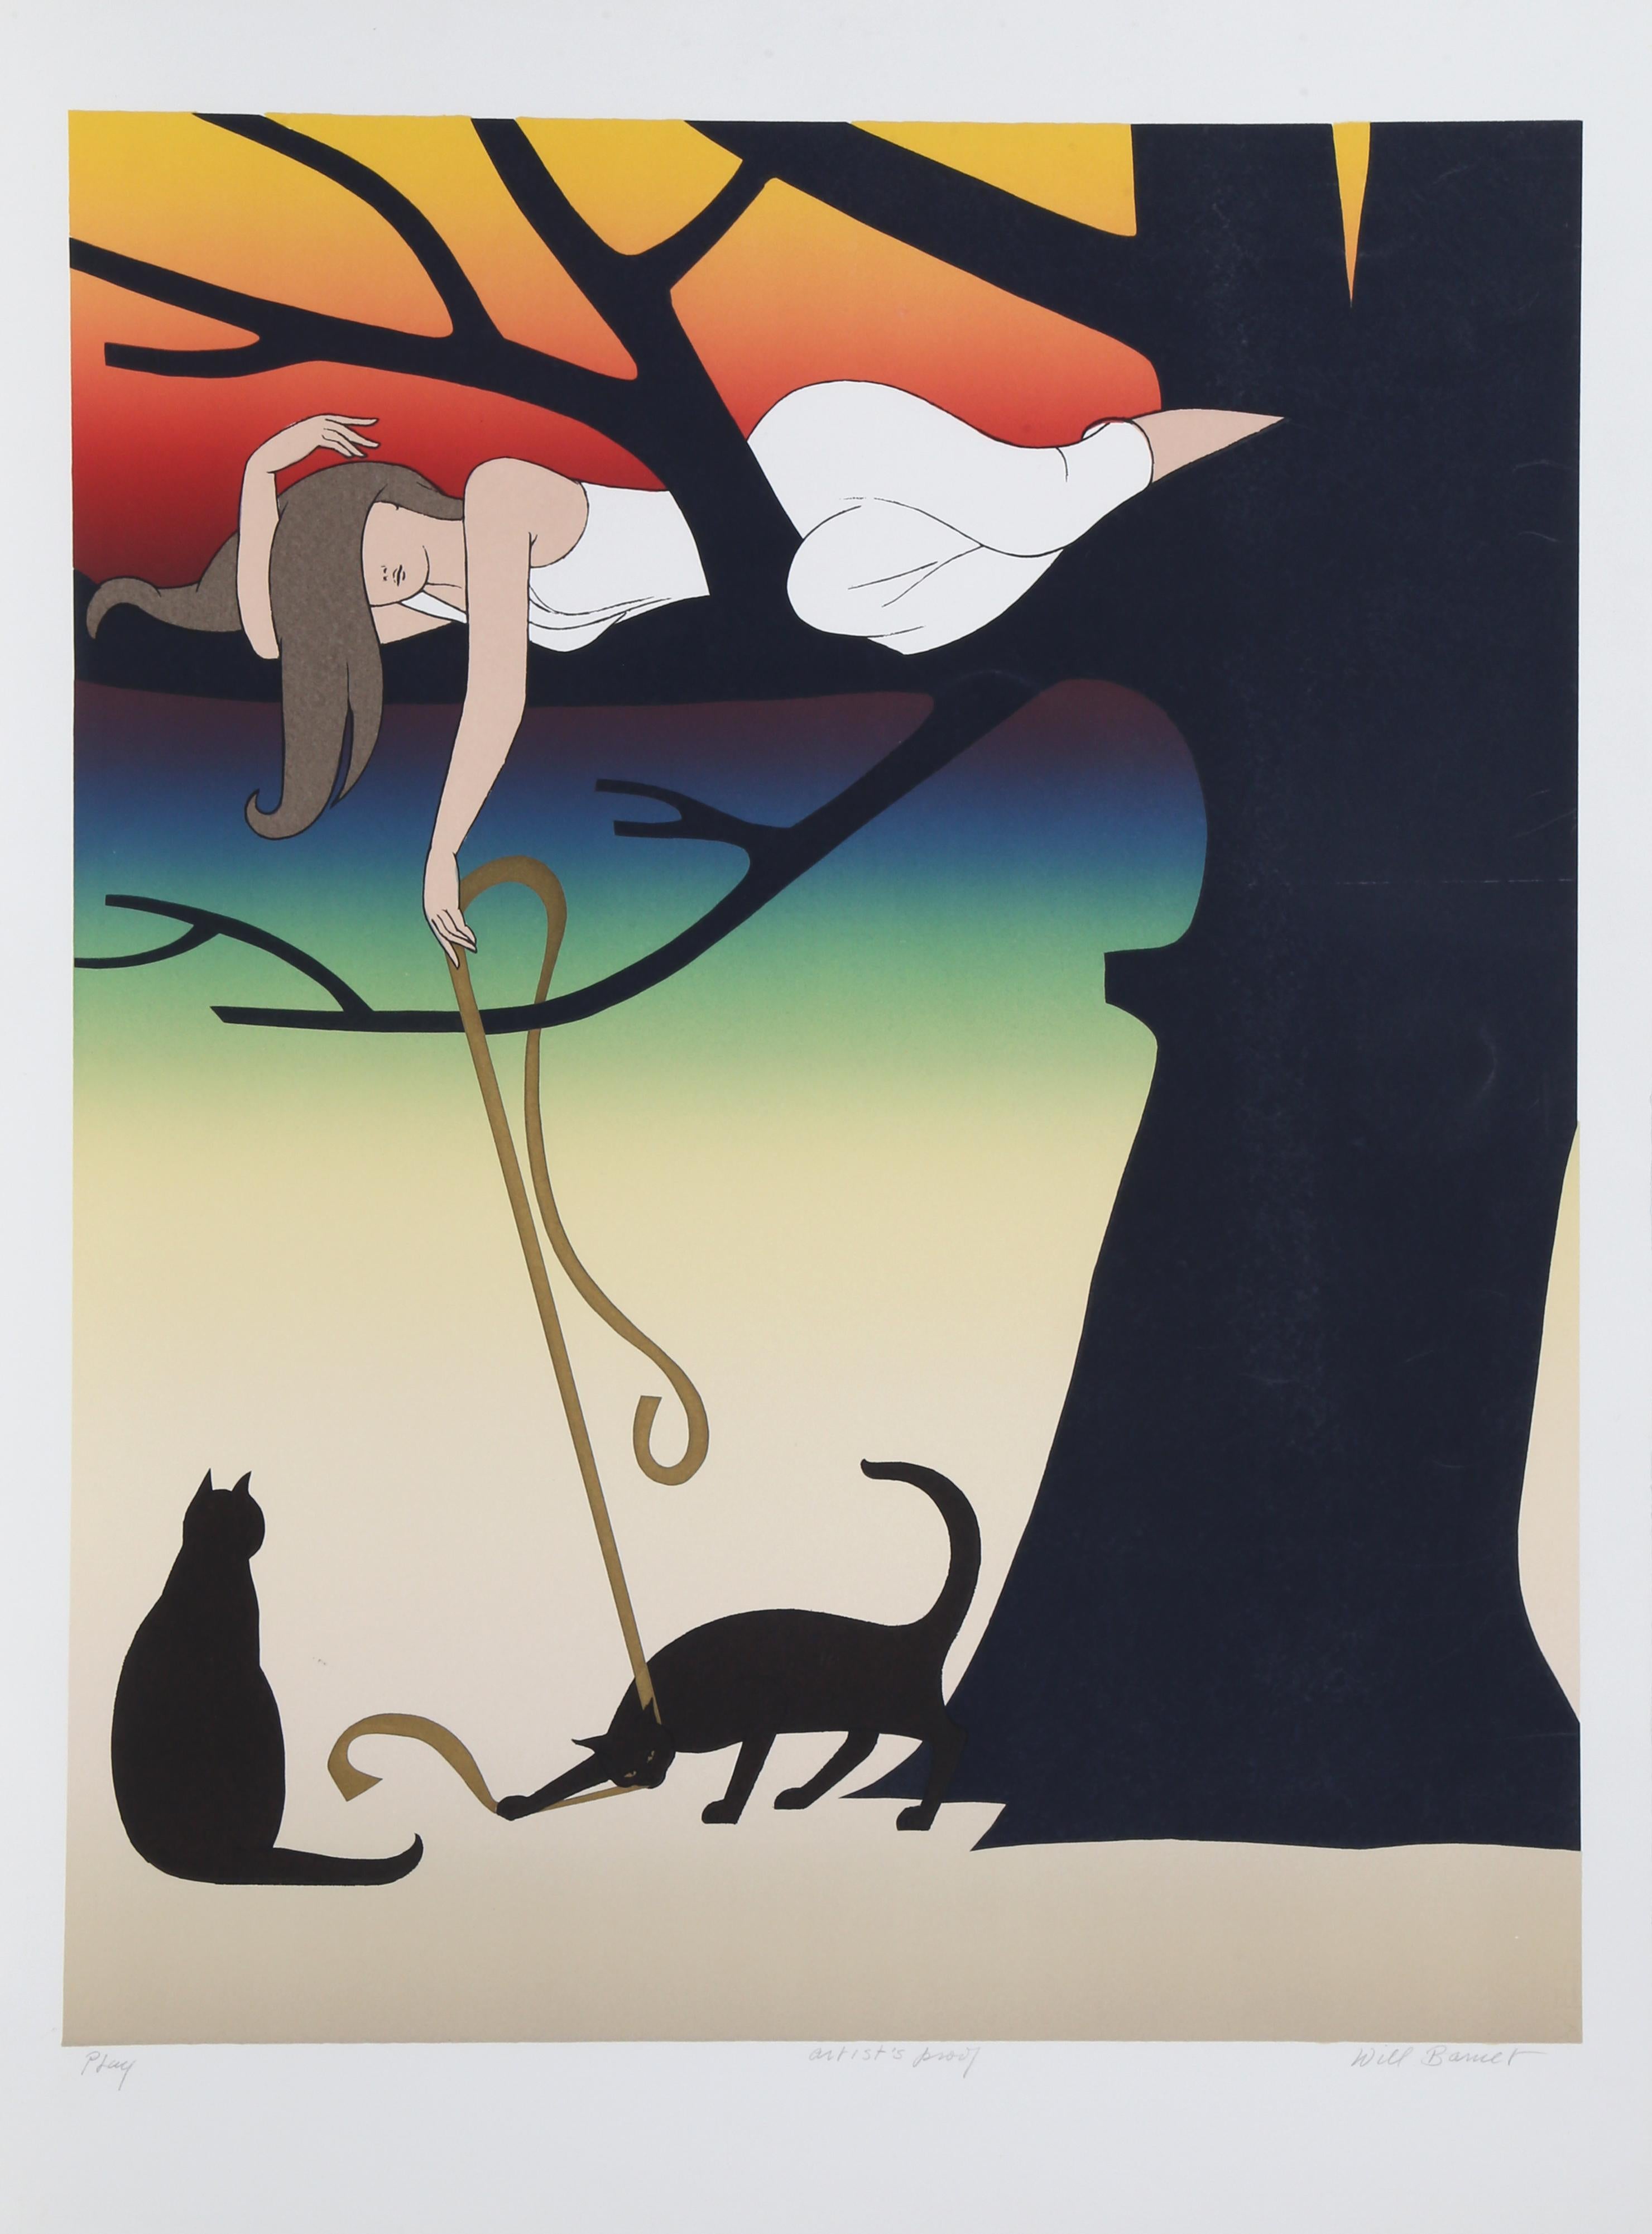 Play, Signed Lithograph by Will Barnet 1975